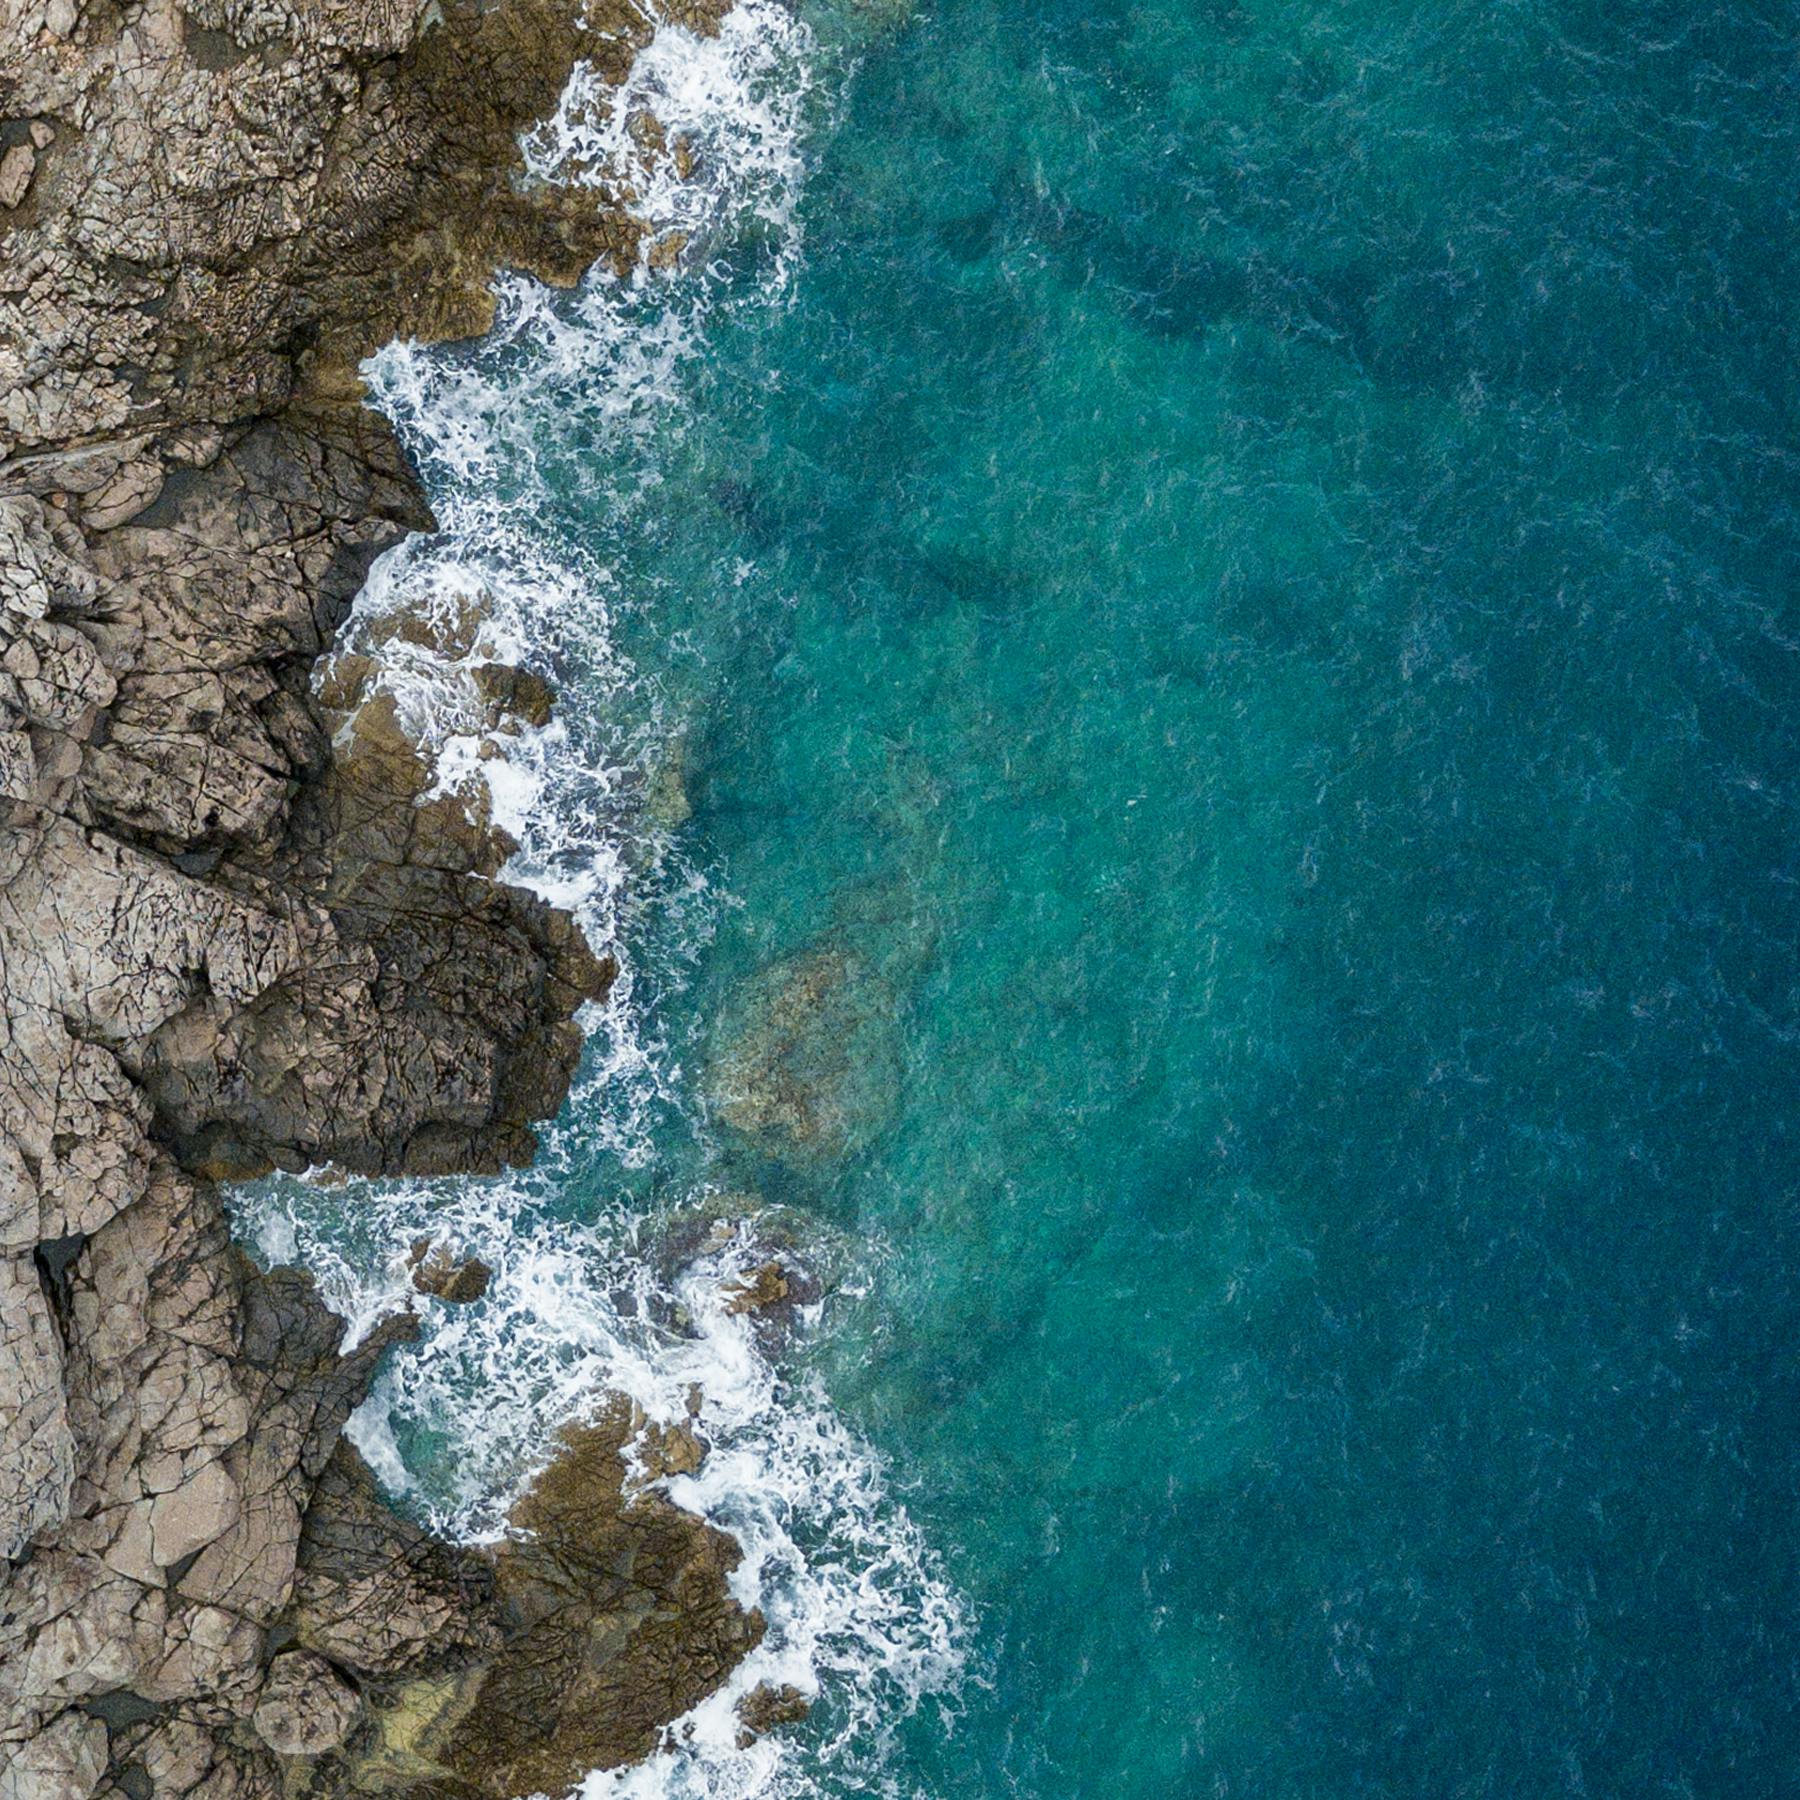 a bird's eye view of the ocean and rocks.